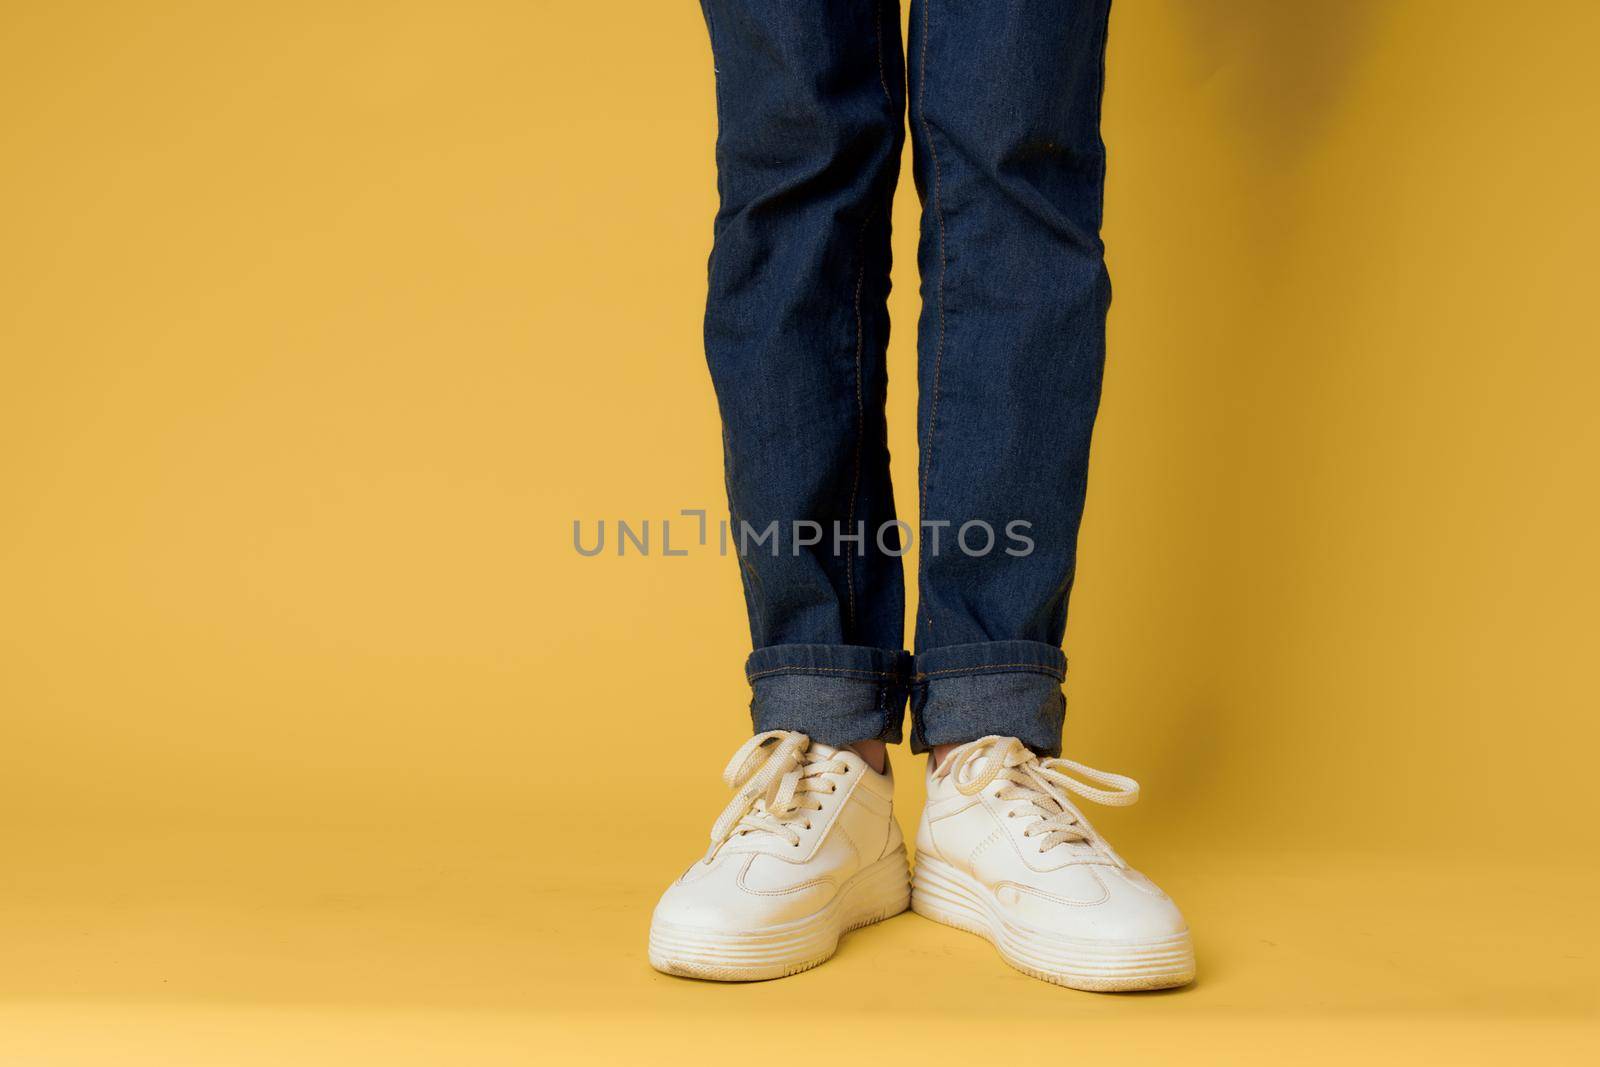 feet jeans fashion shoes white sneakers yellow background. High quality photo